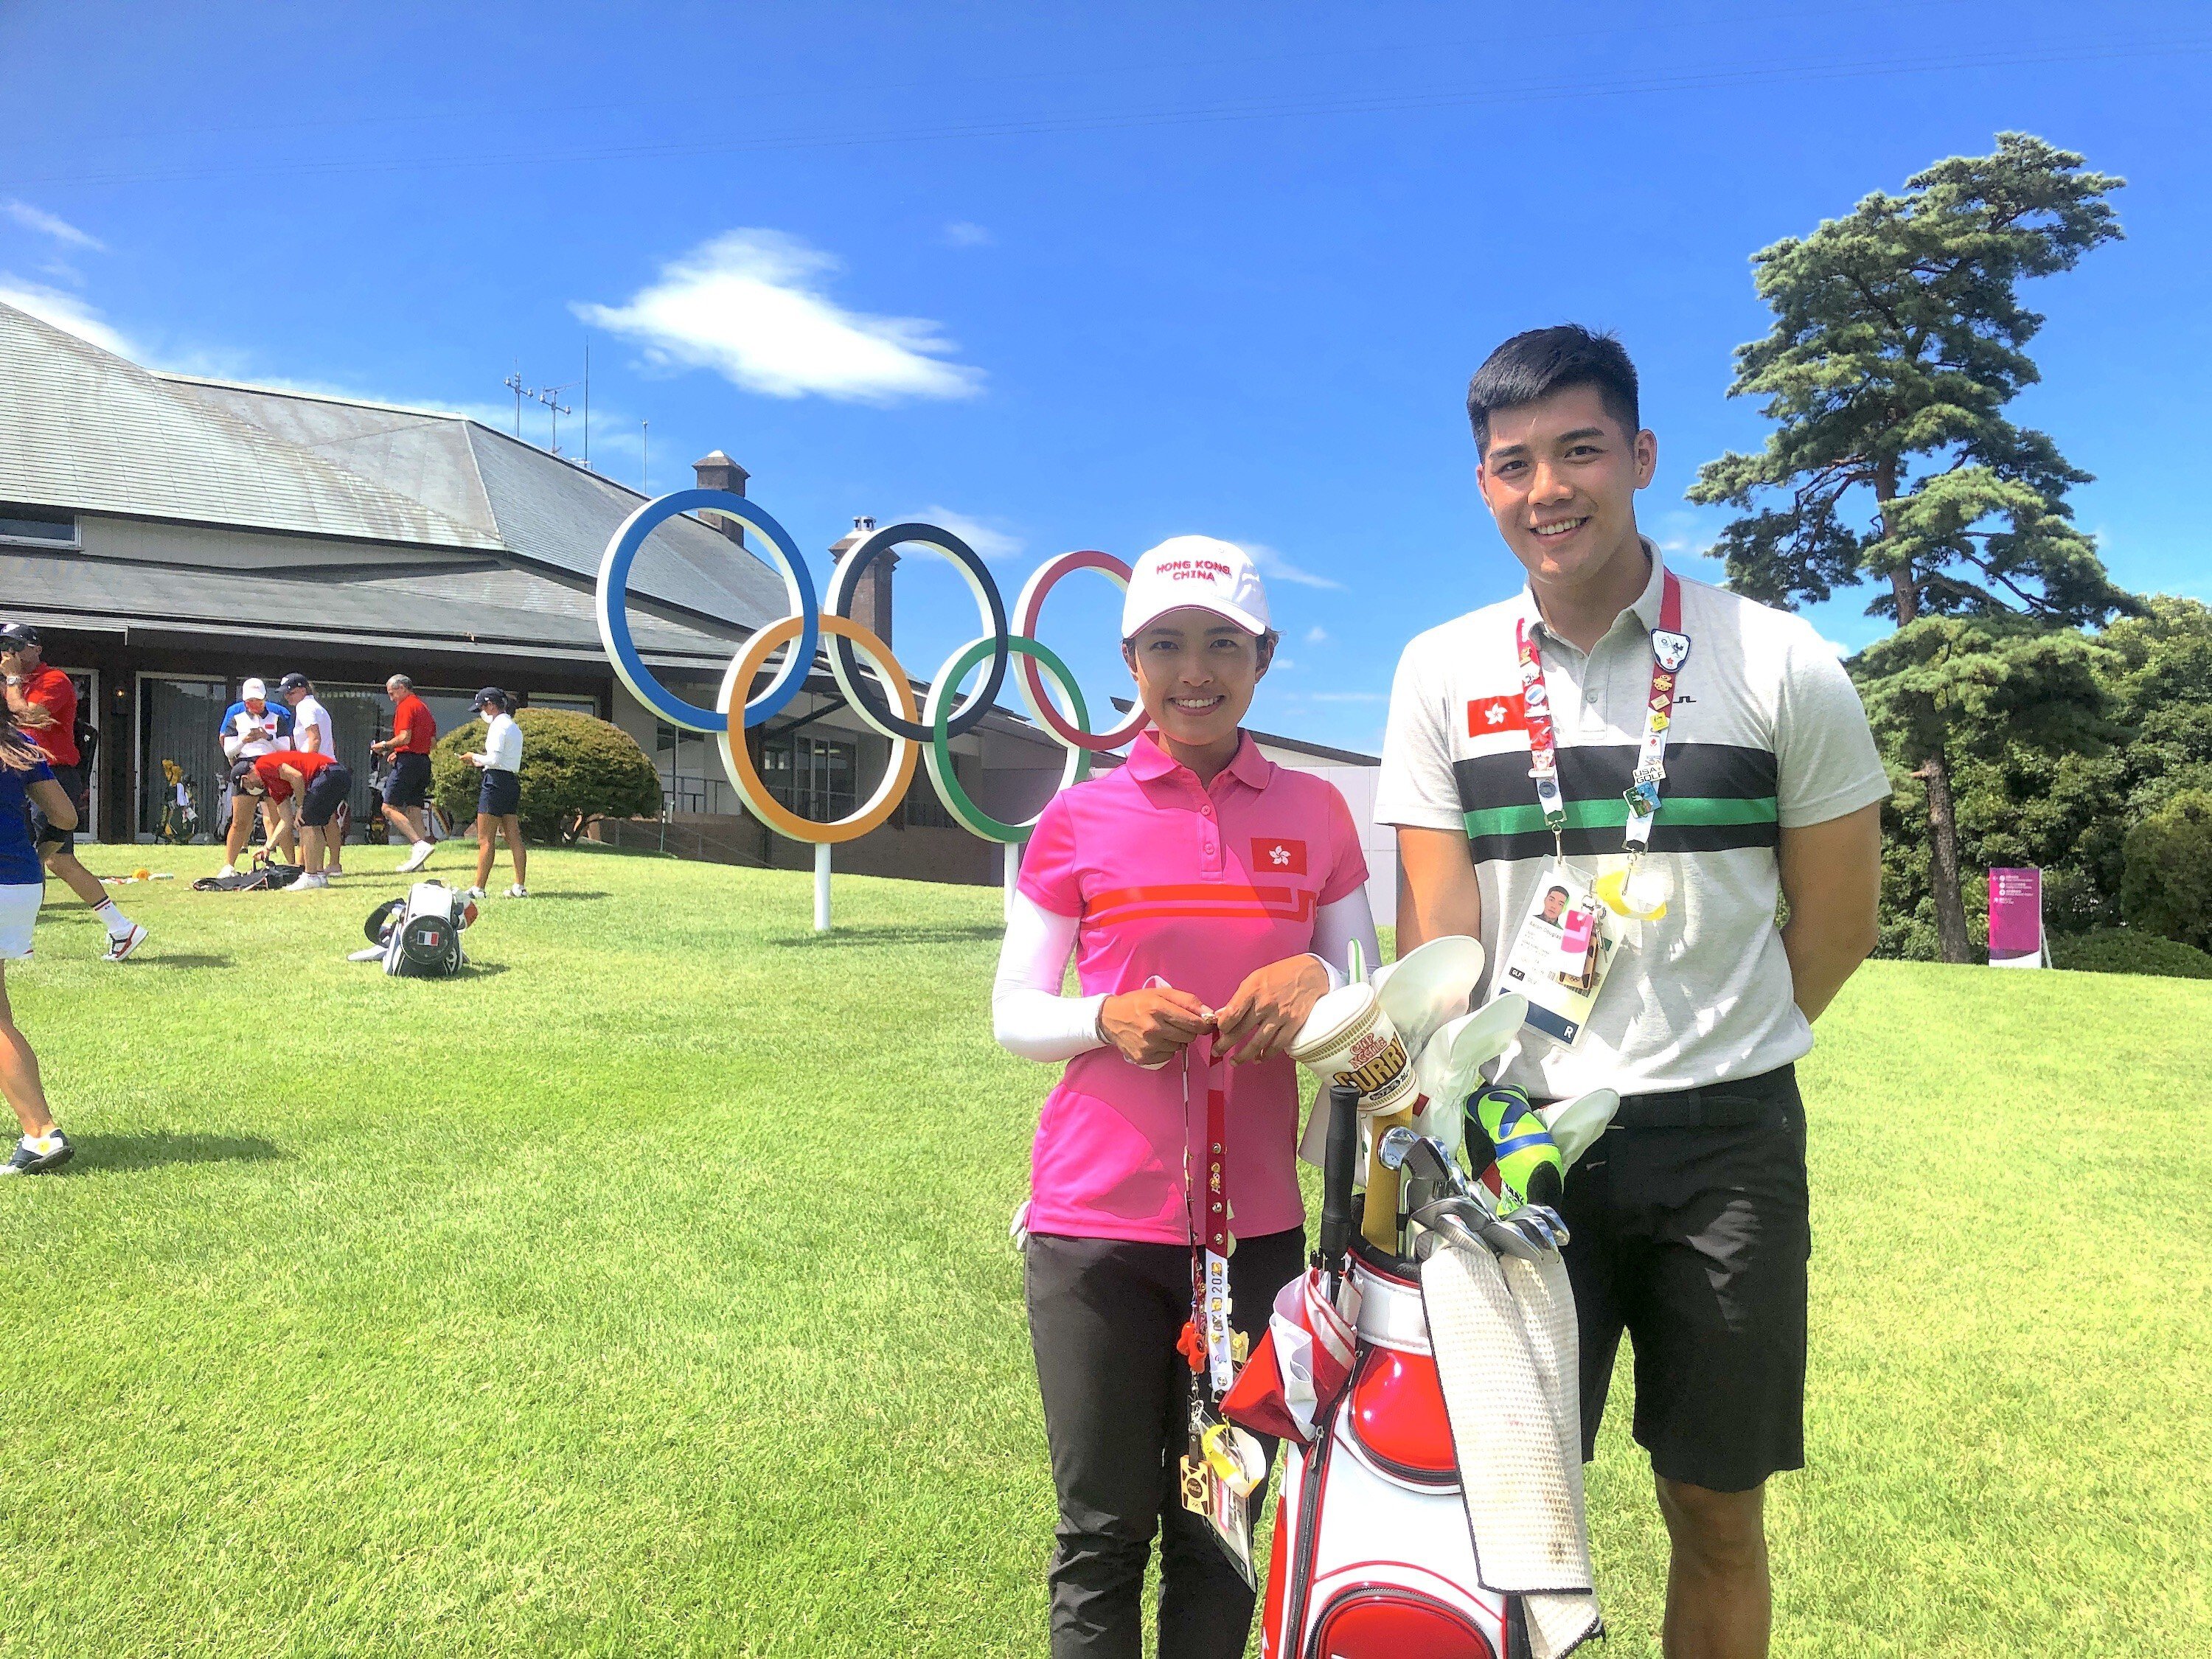 Hong Kong golfer Tiffany Chan Tsz-ching and caddie Aaron Chu at the Kasumigaseki Country Club in Tokyo, where she will open her Olympic Games campaign on Wednesday. Photo: IGF